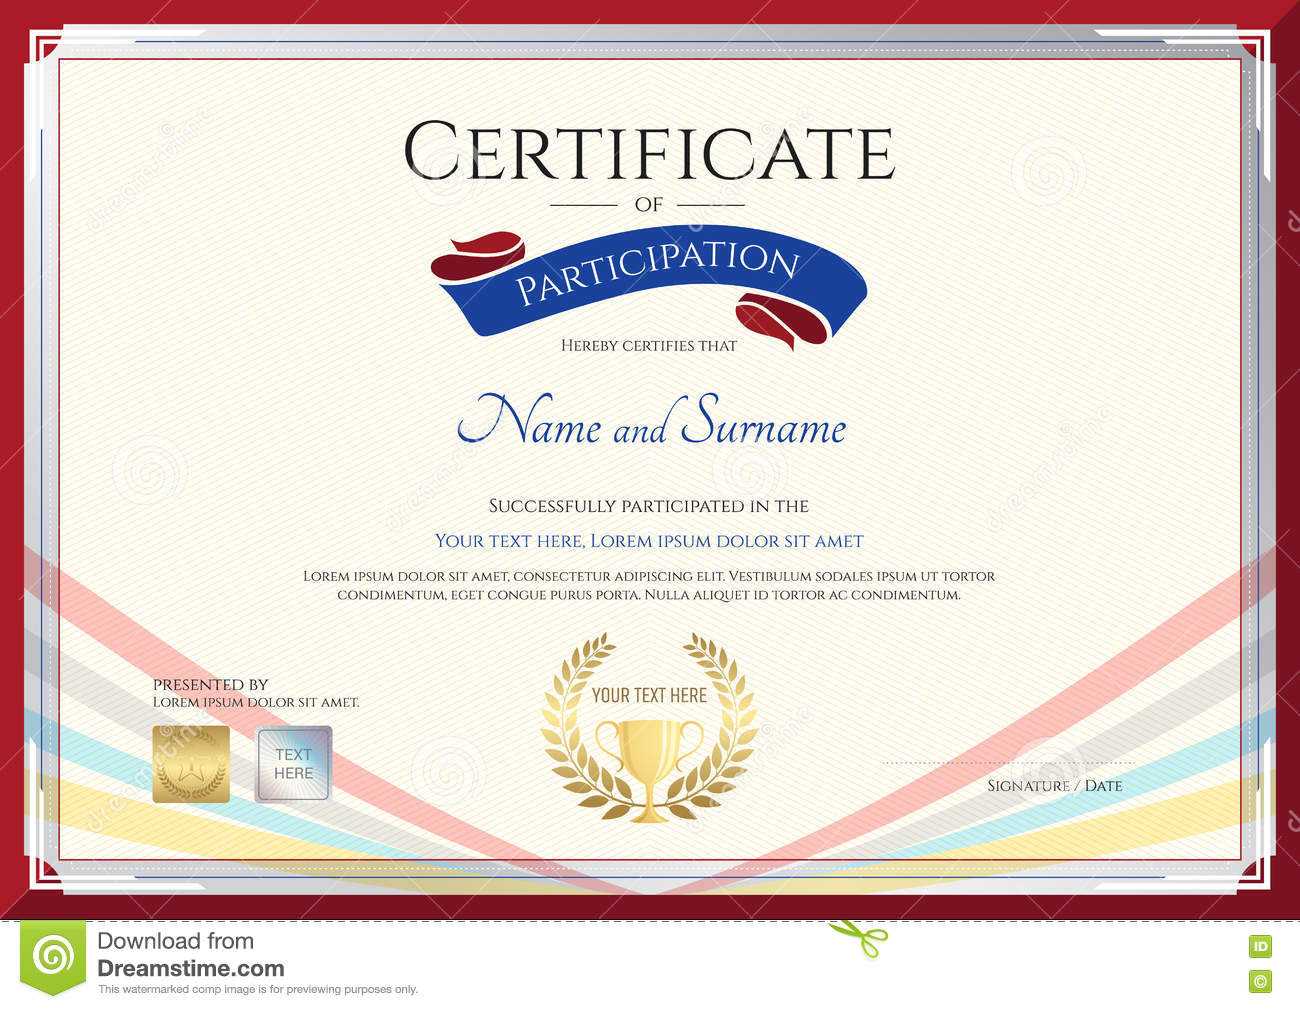 Certificate Template For Achievement, Appreciation Or For Conference Participation Certificate Template